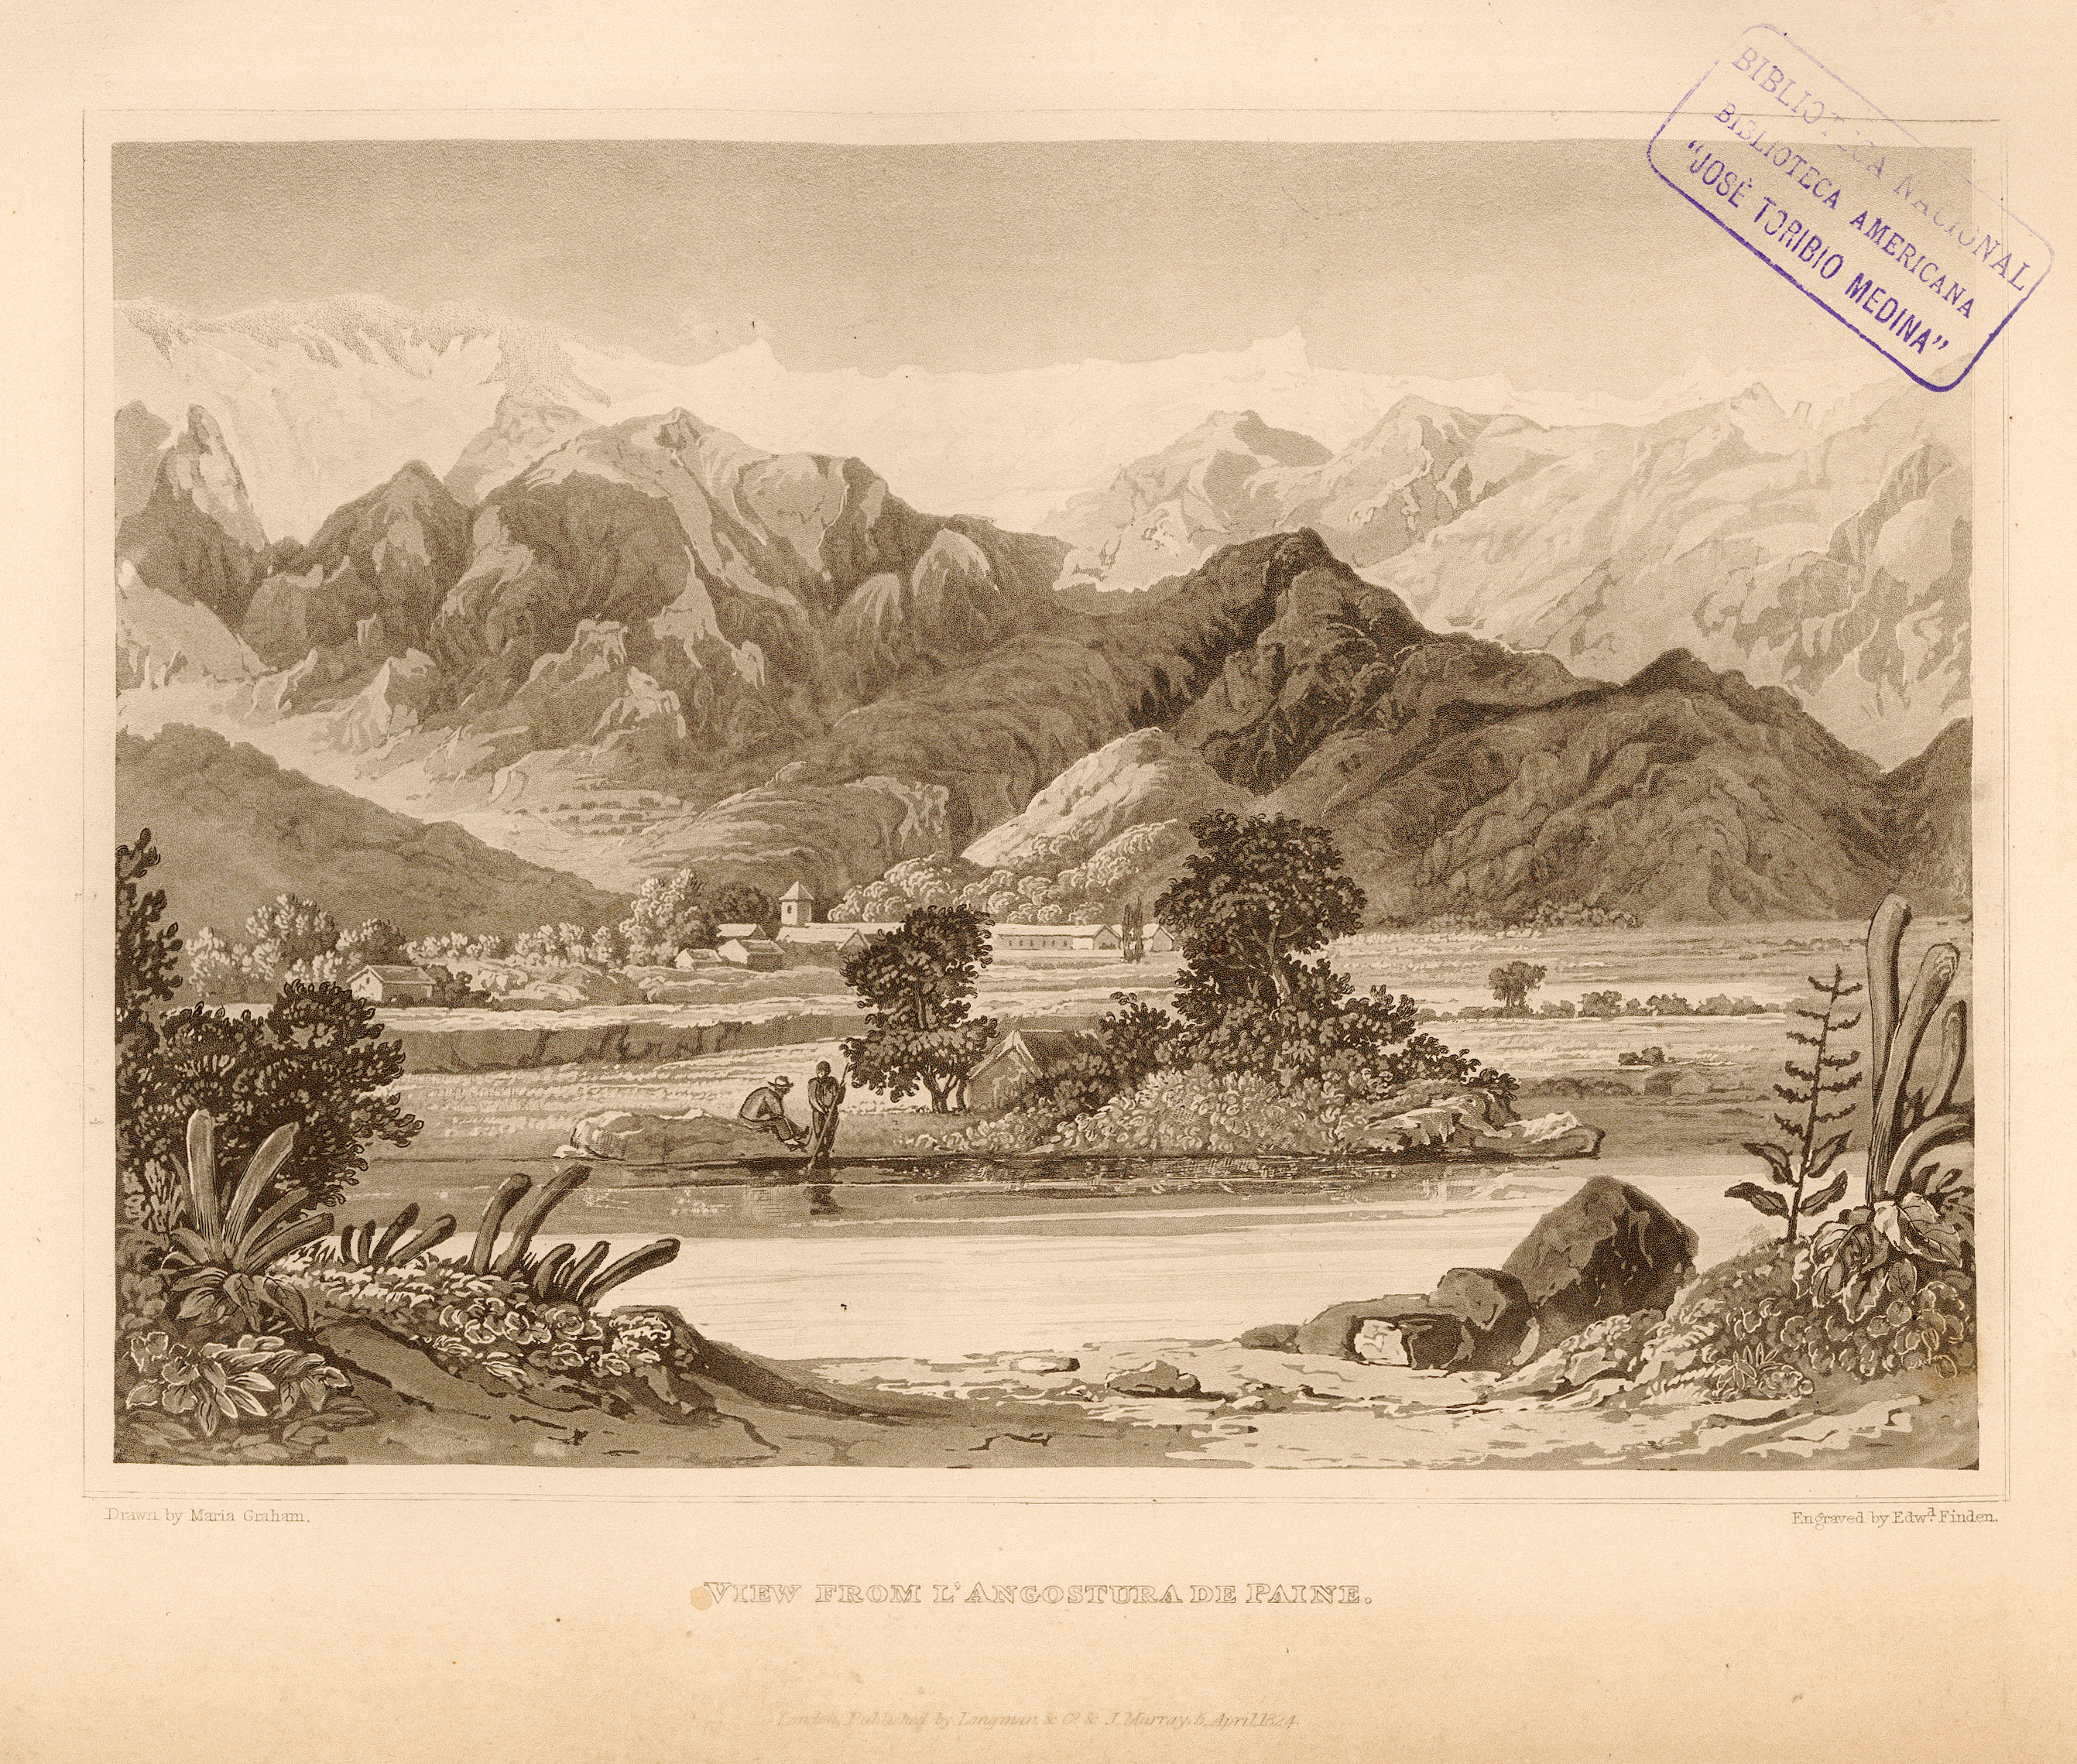 View from L' Angostura de Paine, 1822